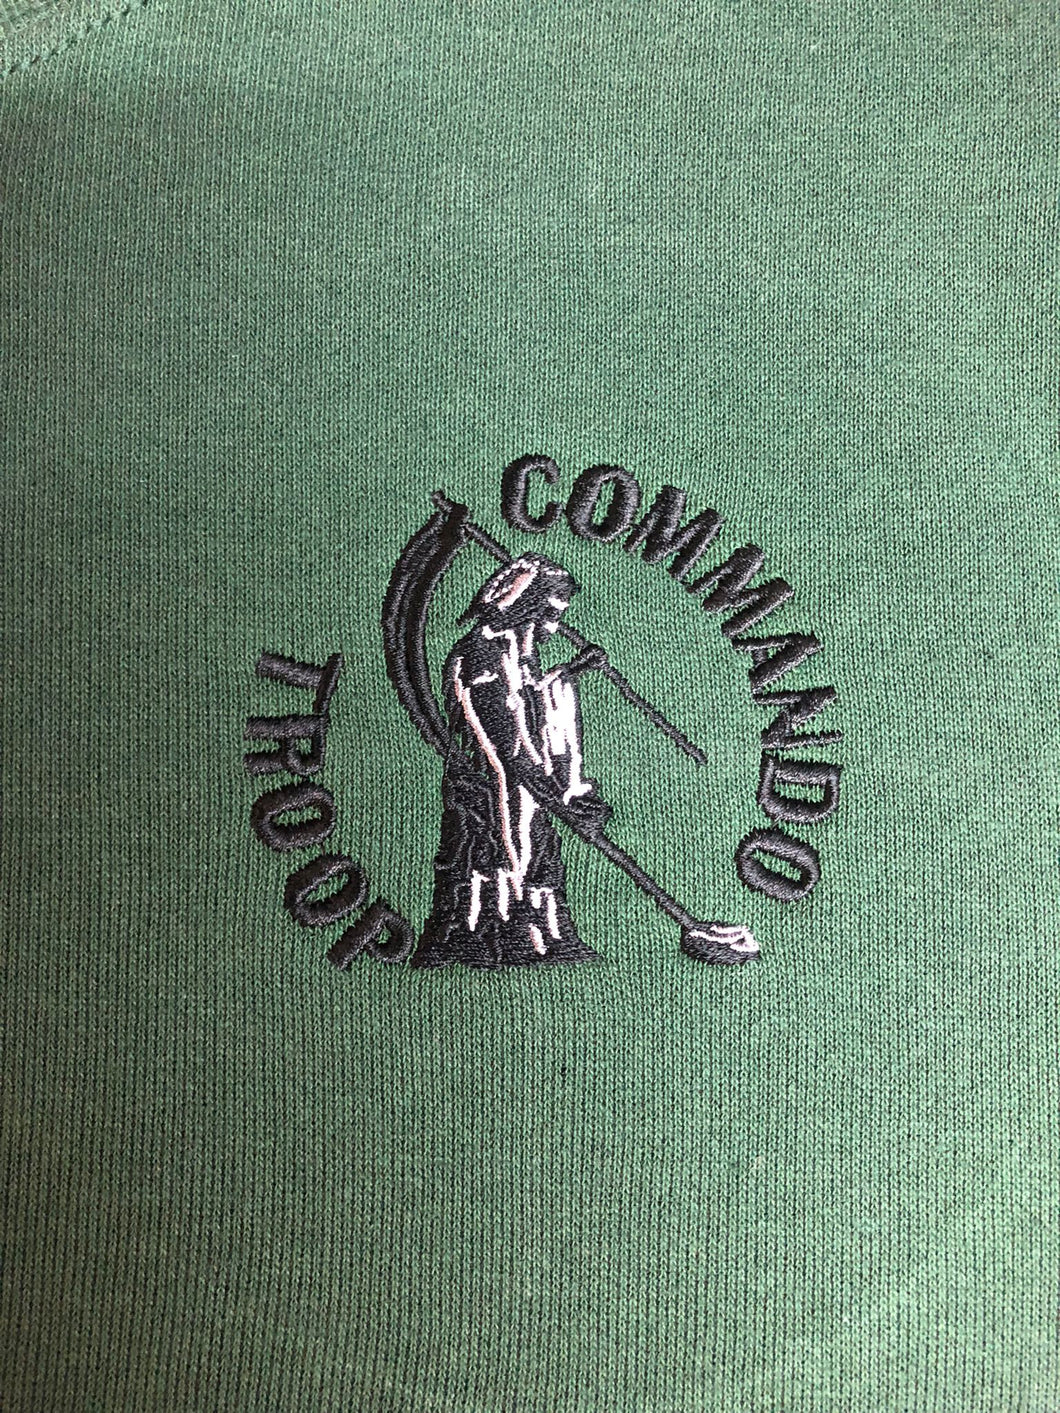 Commando Troop Bomb Disposal / Search Valon Man - Embroidered Design - Choose your Garment